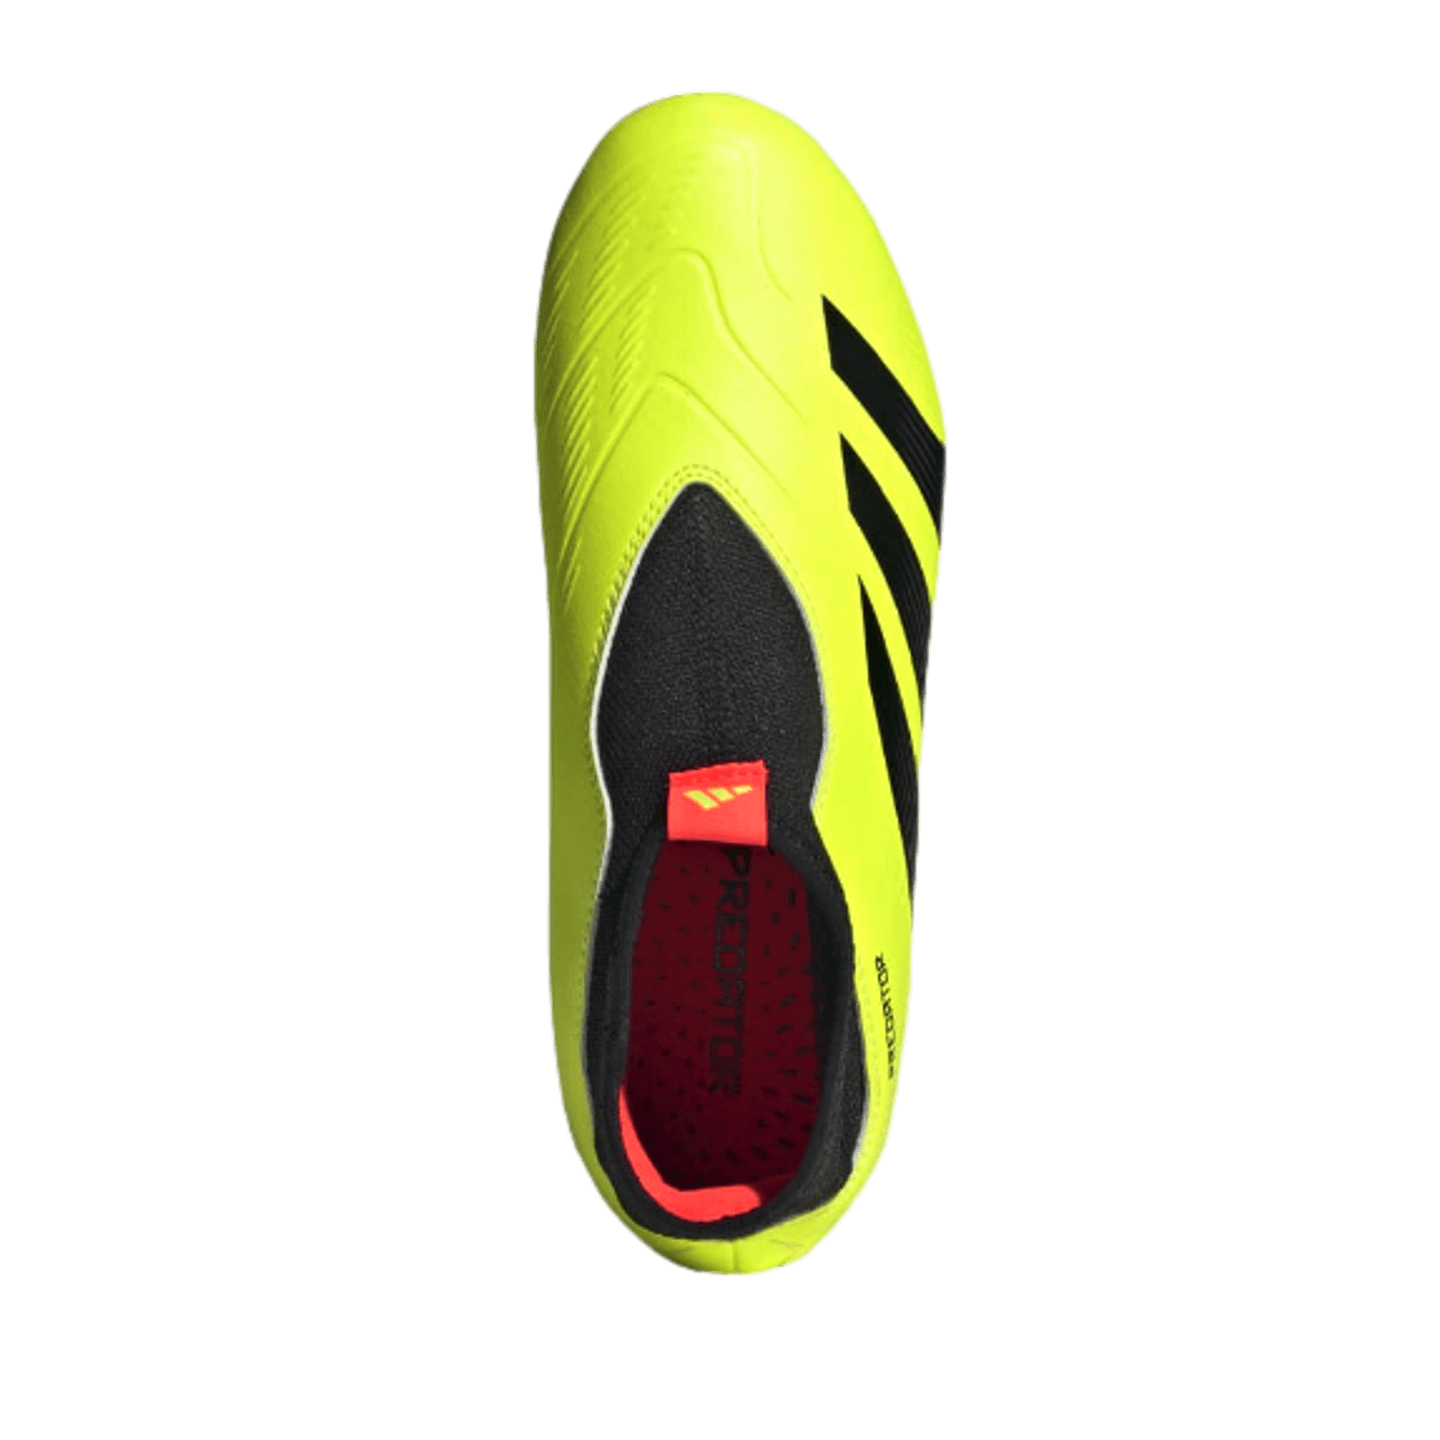 Adidas Predator League Laceless Youth Firm Ground Cleats